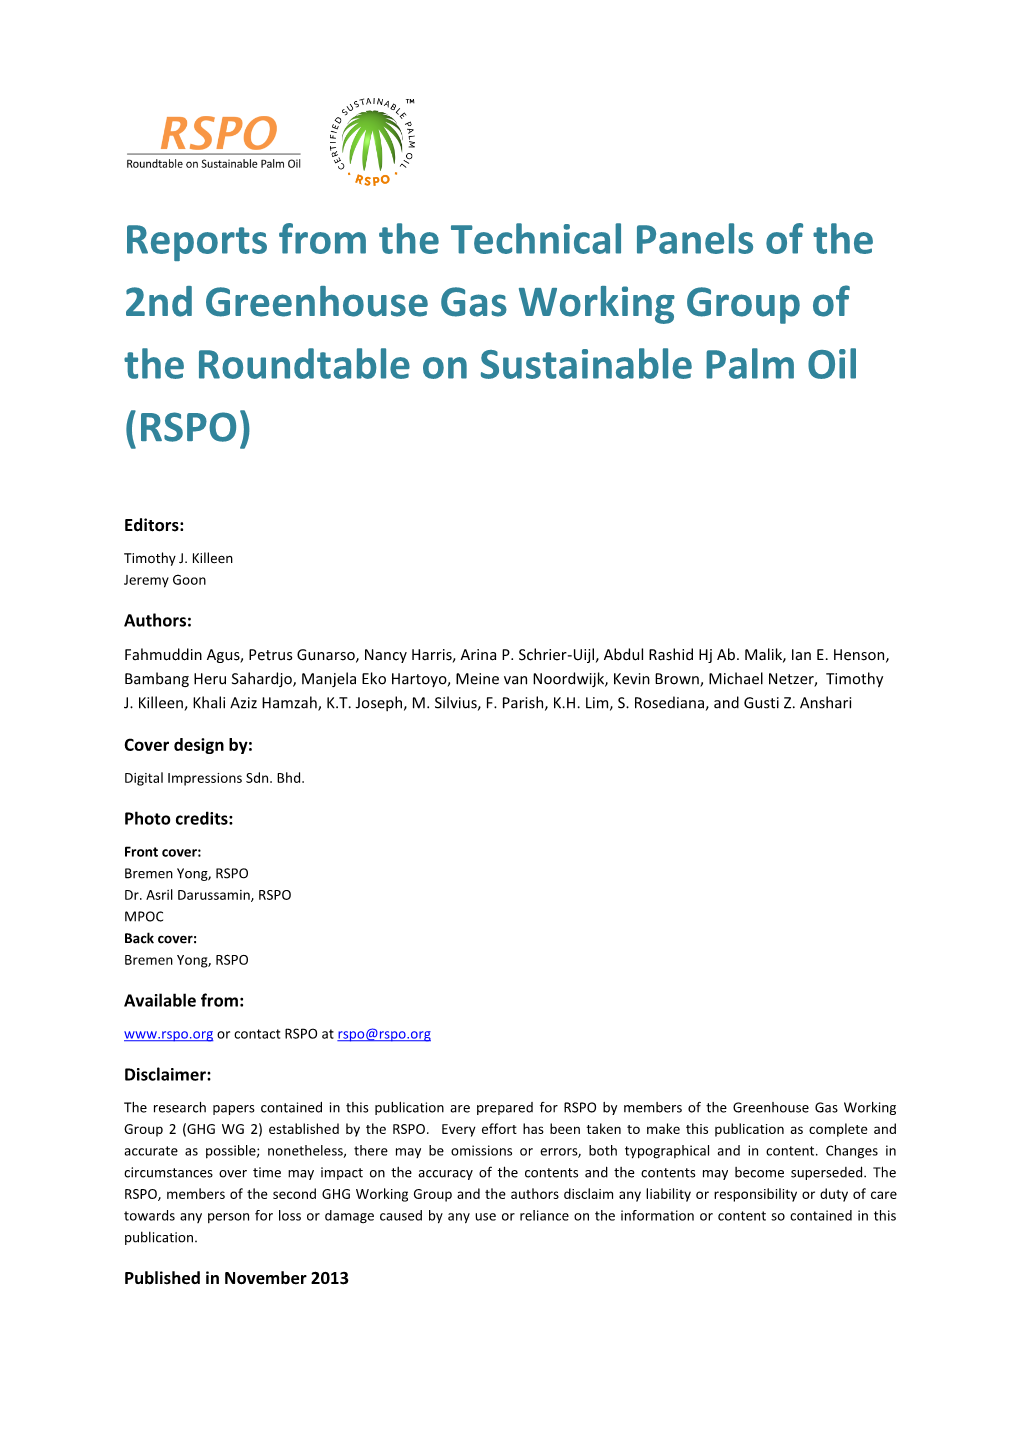 Reports from the Technical Panels of the 2Nd Greenhouse Gas Working Group of the Roundtable on Sustainable Palm Oil (RSPO)